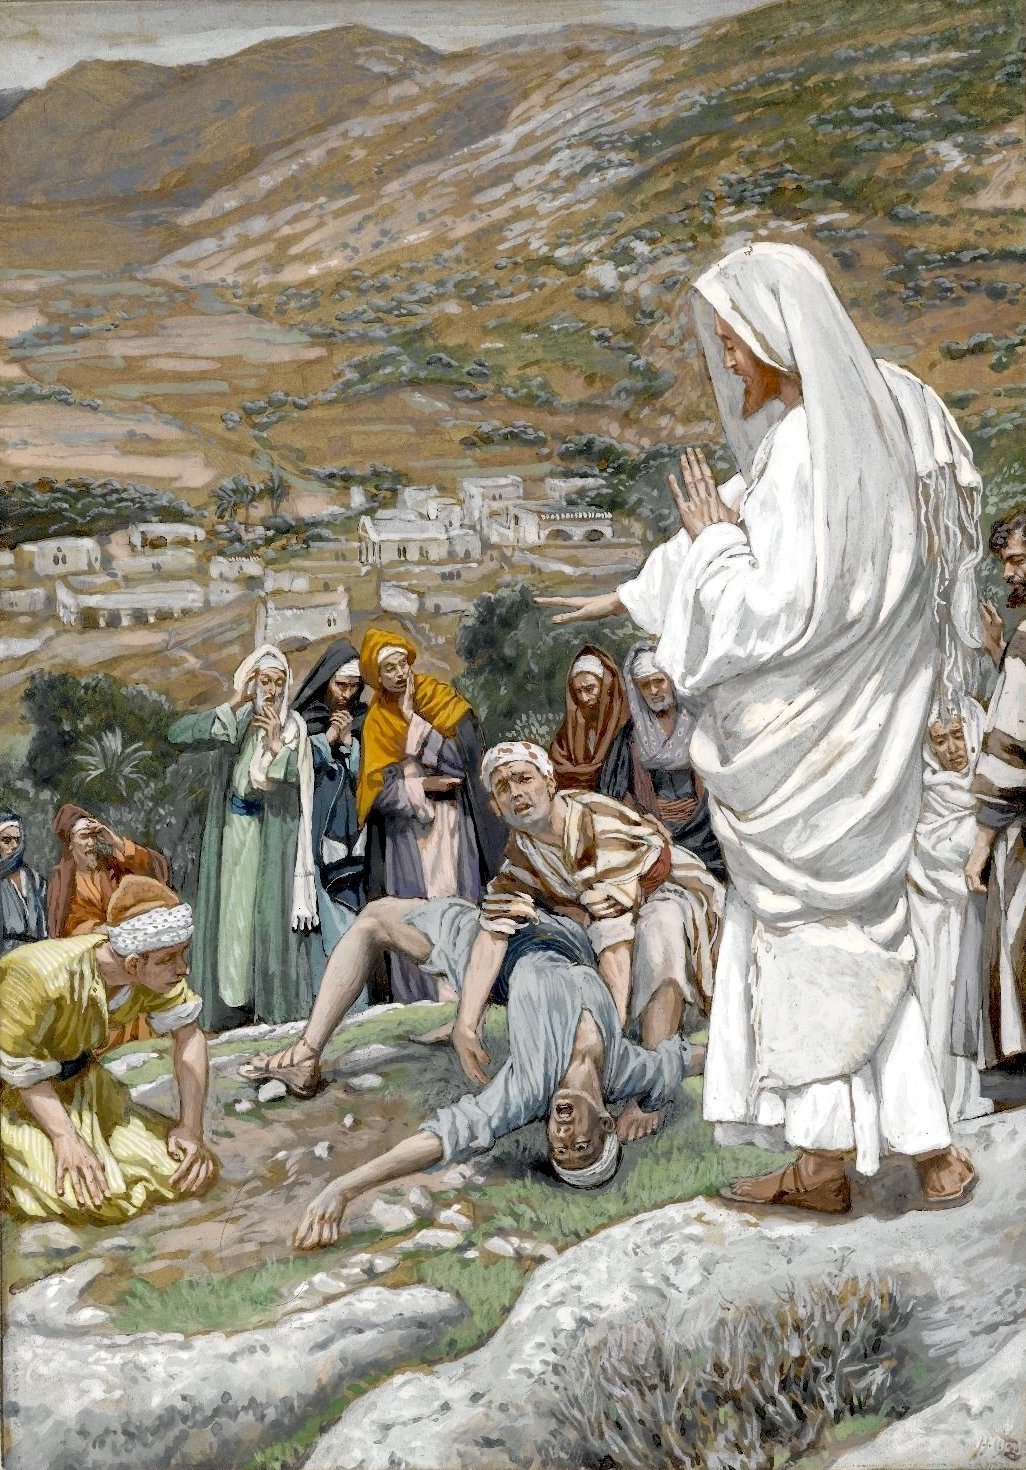 The Soul's Healing - A Sermon for the 10th Sunday after Pentecost (2022)